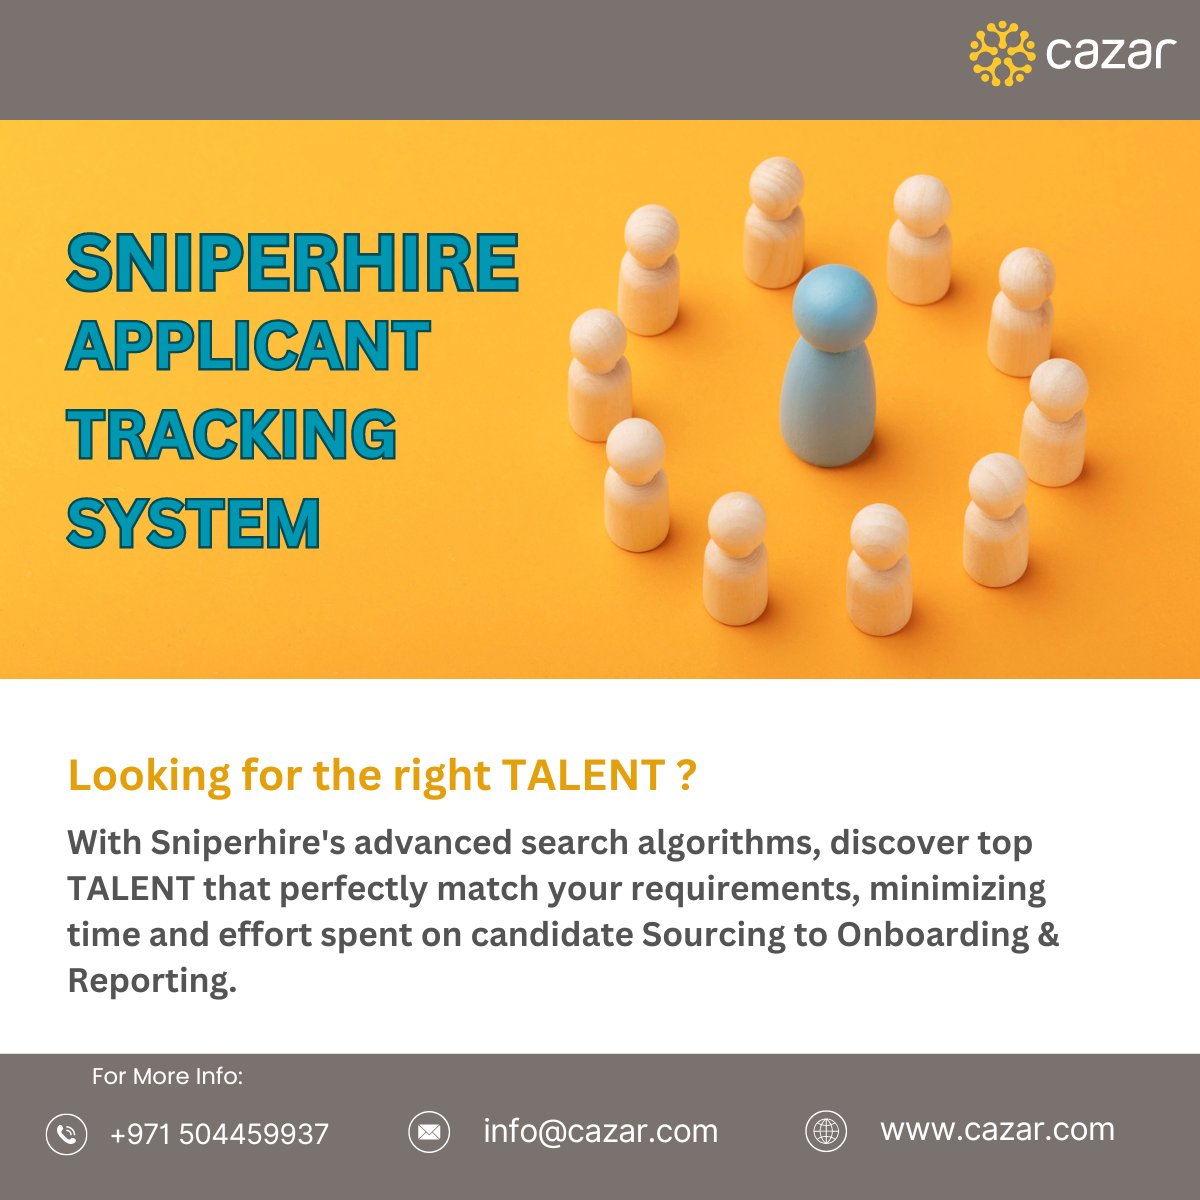 Ready to #revolutionize your #hiring process?

🚀 Experience the #power of streamlined #hiringprocess with the best #ApplicantTrackingSystem - '#SNIPERHIRE'.

For more info / Request a free #demo
Please #CLICK on: cazar.com

#hiring #ATS #recruitmentprocess